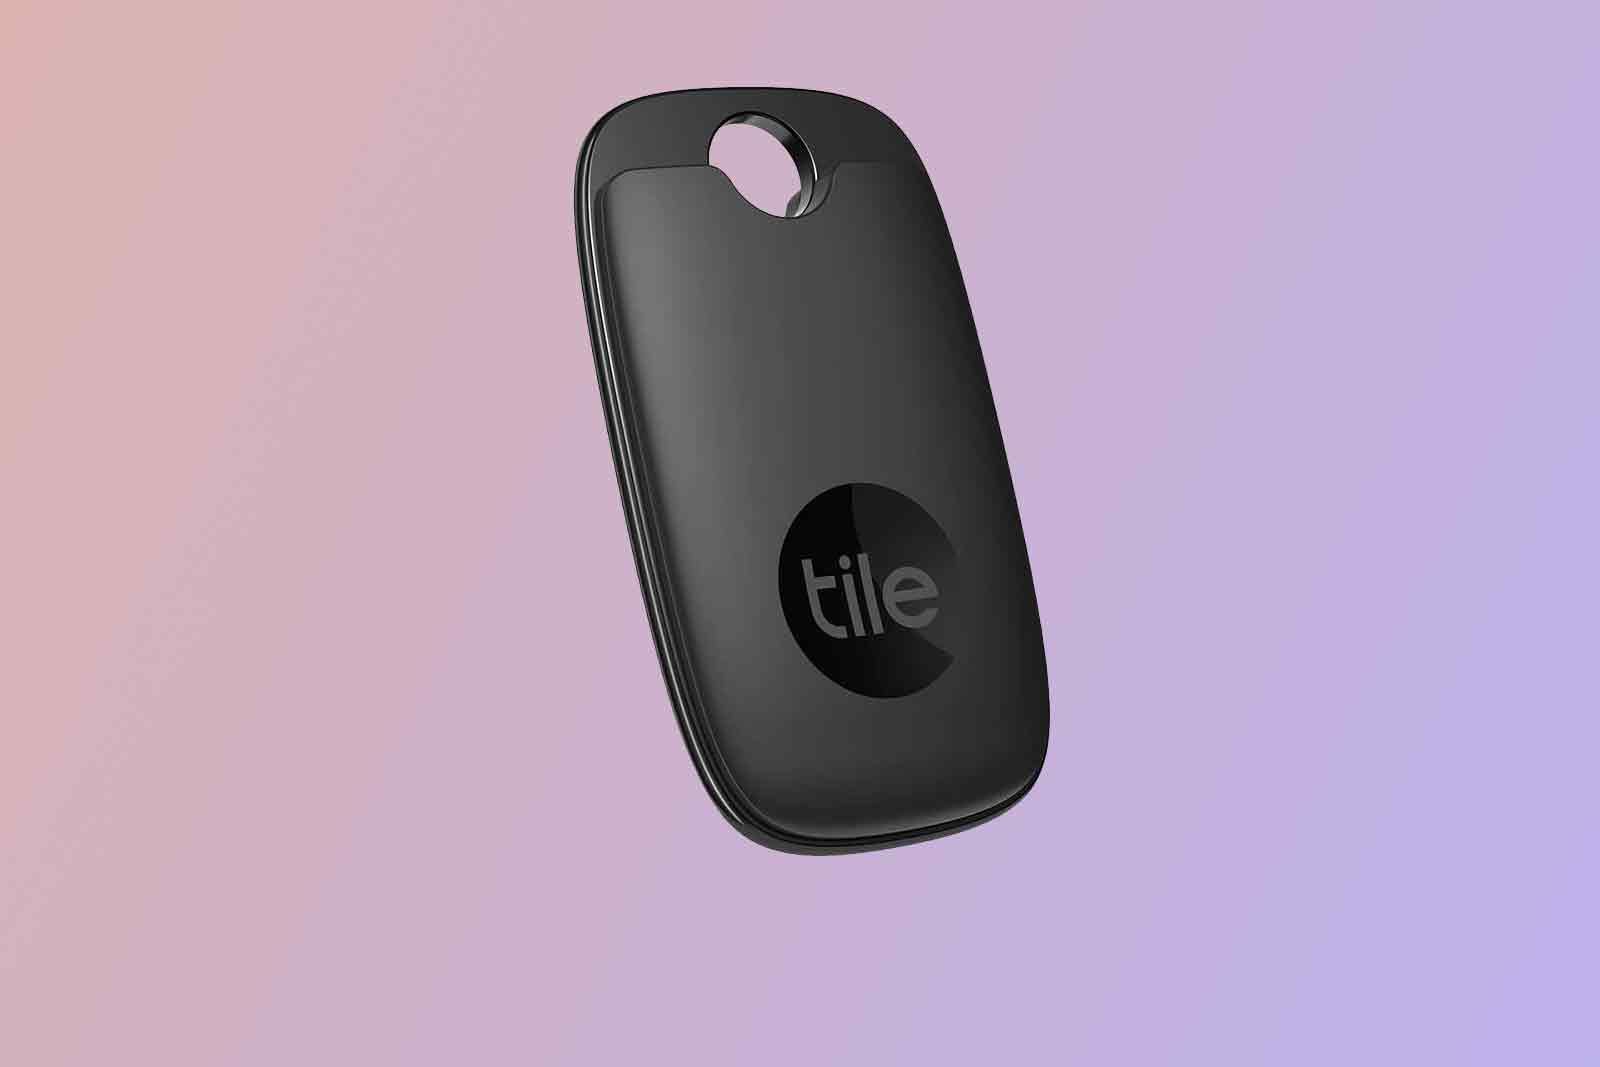 Apple AirTag vs Tile vs Samsung Galaxy SmartTag: which tracker is best?